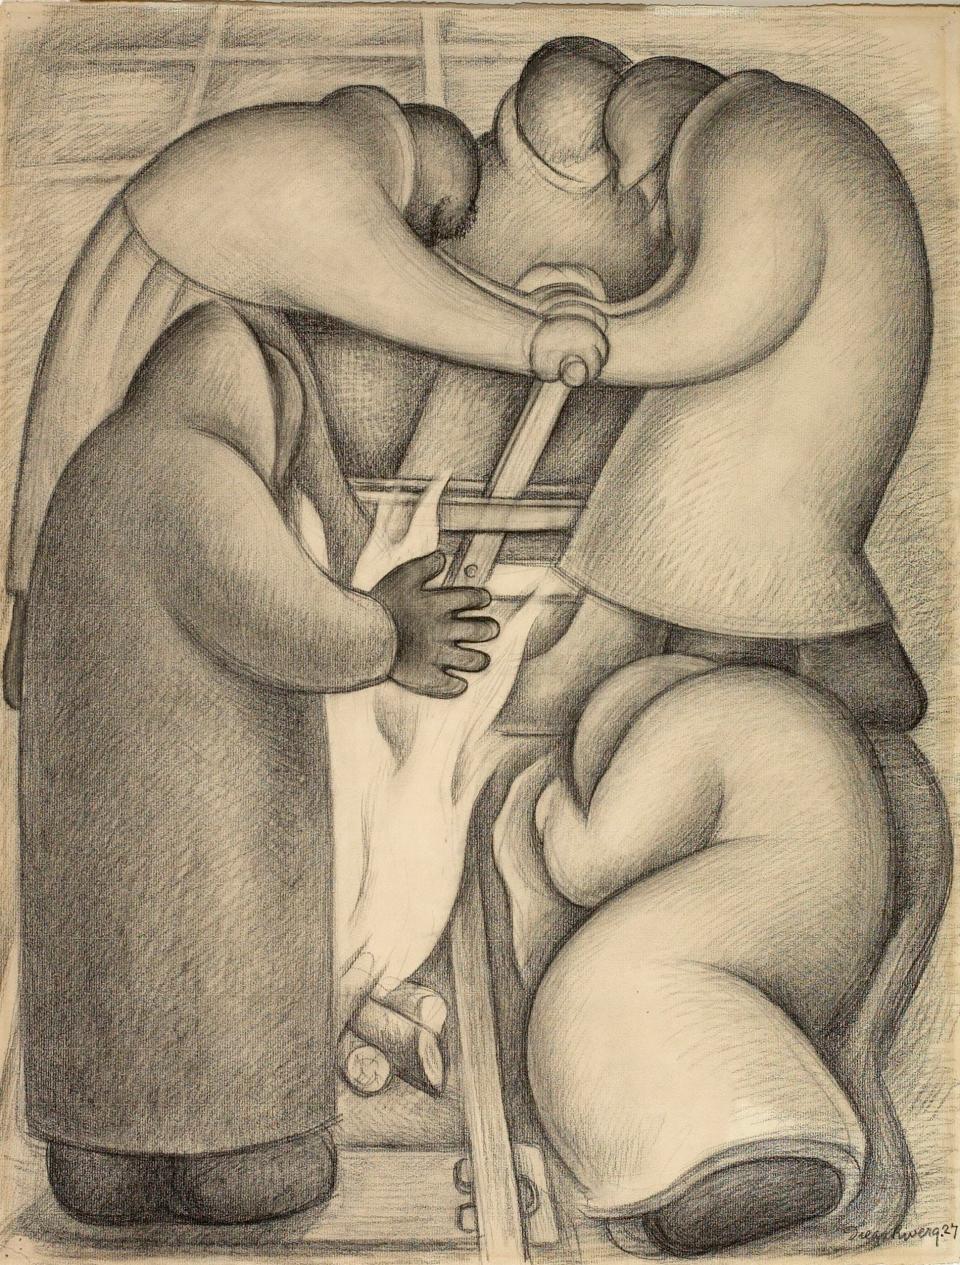 Artist is Diego Rivera (Mexican, 1886-1957) Enrielando, Moscú (Sawing Rails, Moscow), 1927. Conté crayon on paper, 25-by-19 inches at Artis—Naples, The Baker Museum. Gift of Harry Pollak, 2022.